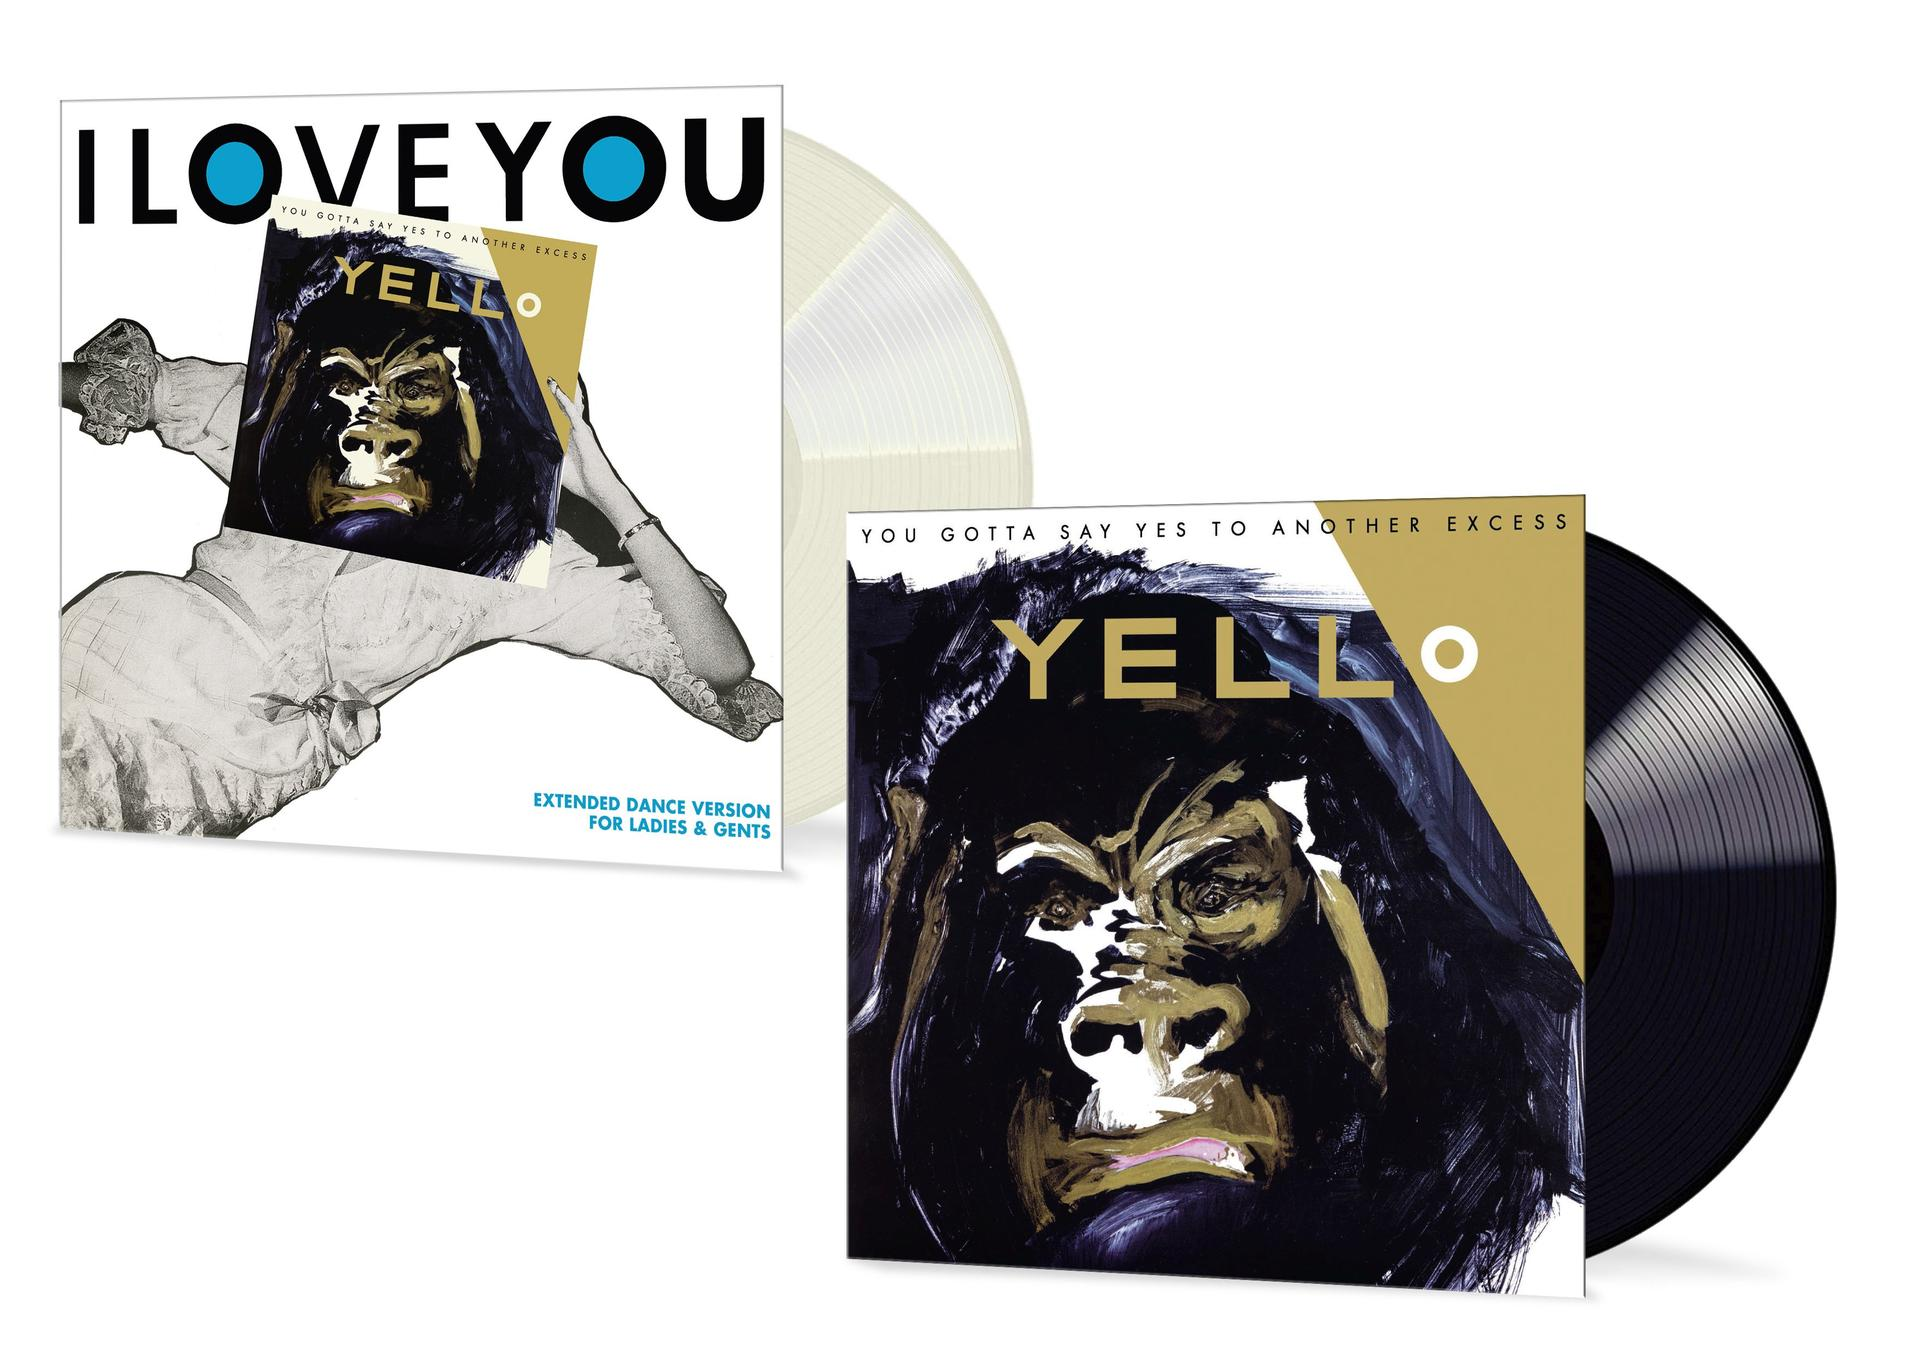 Yello - You (Ltd.Re-Issue) Excess Yes Say To Another - Gotta (Vinyl)